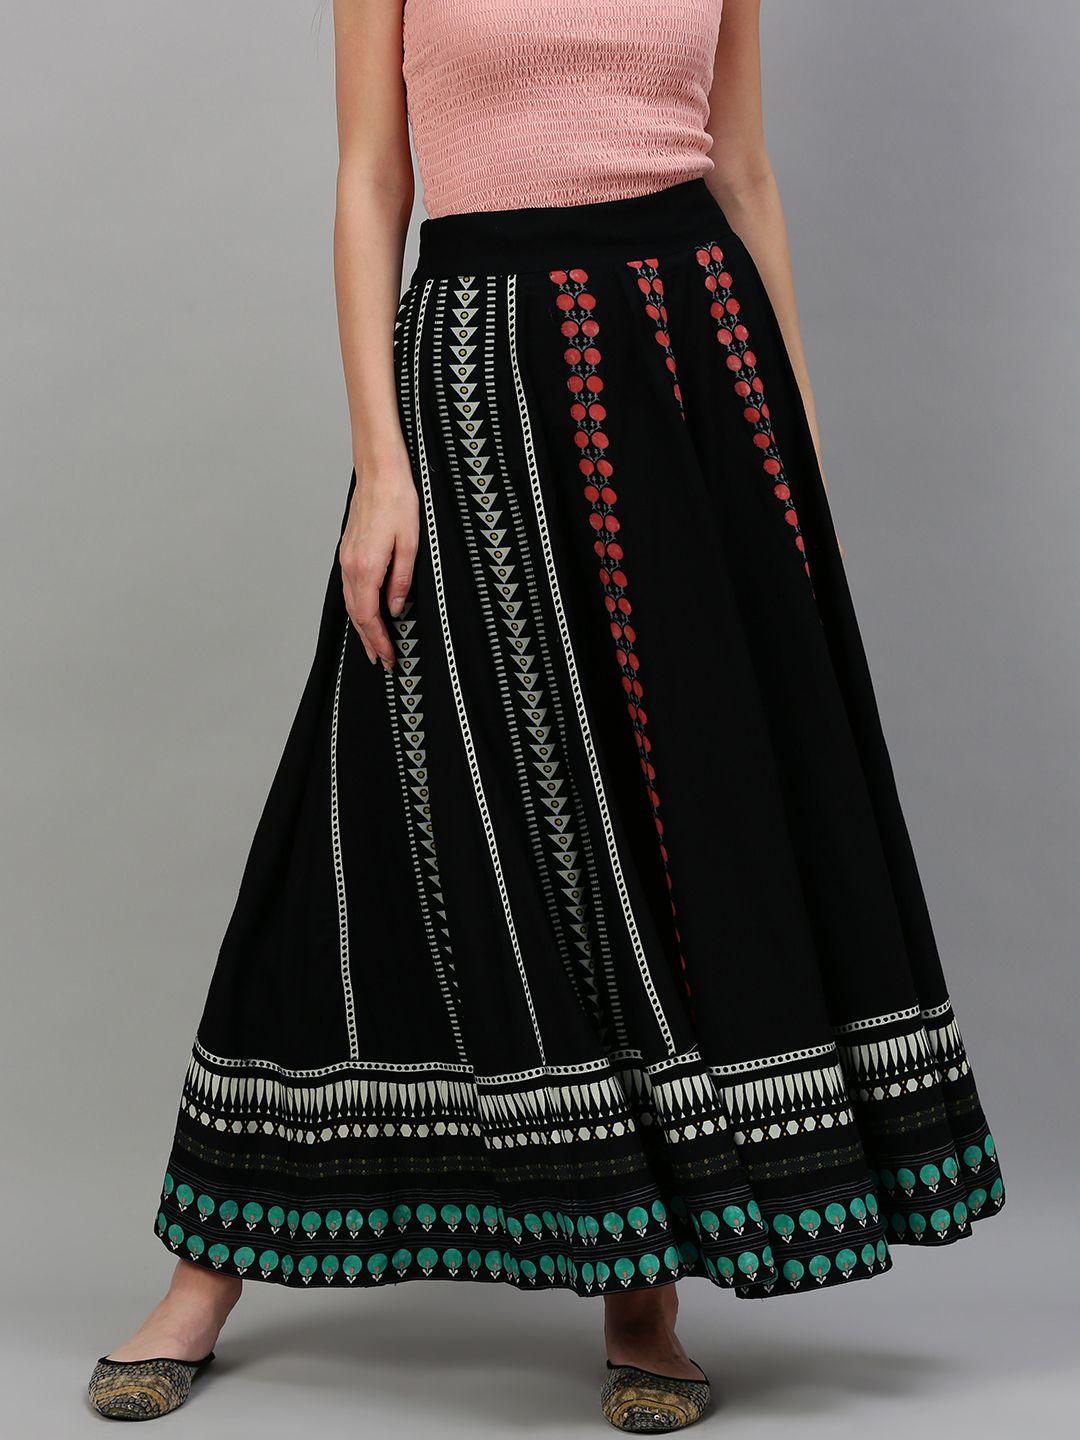 w-womans-black-and-white-ethnic-printed-skirt